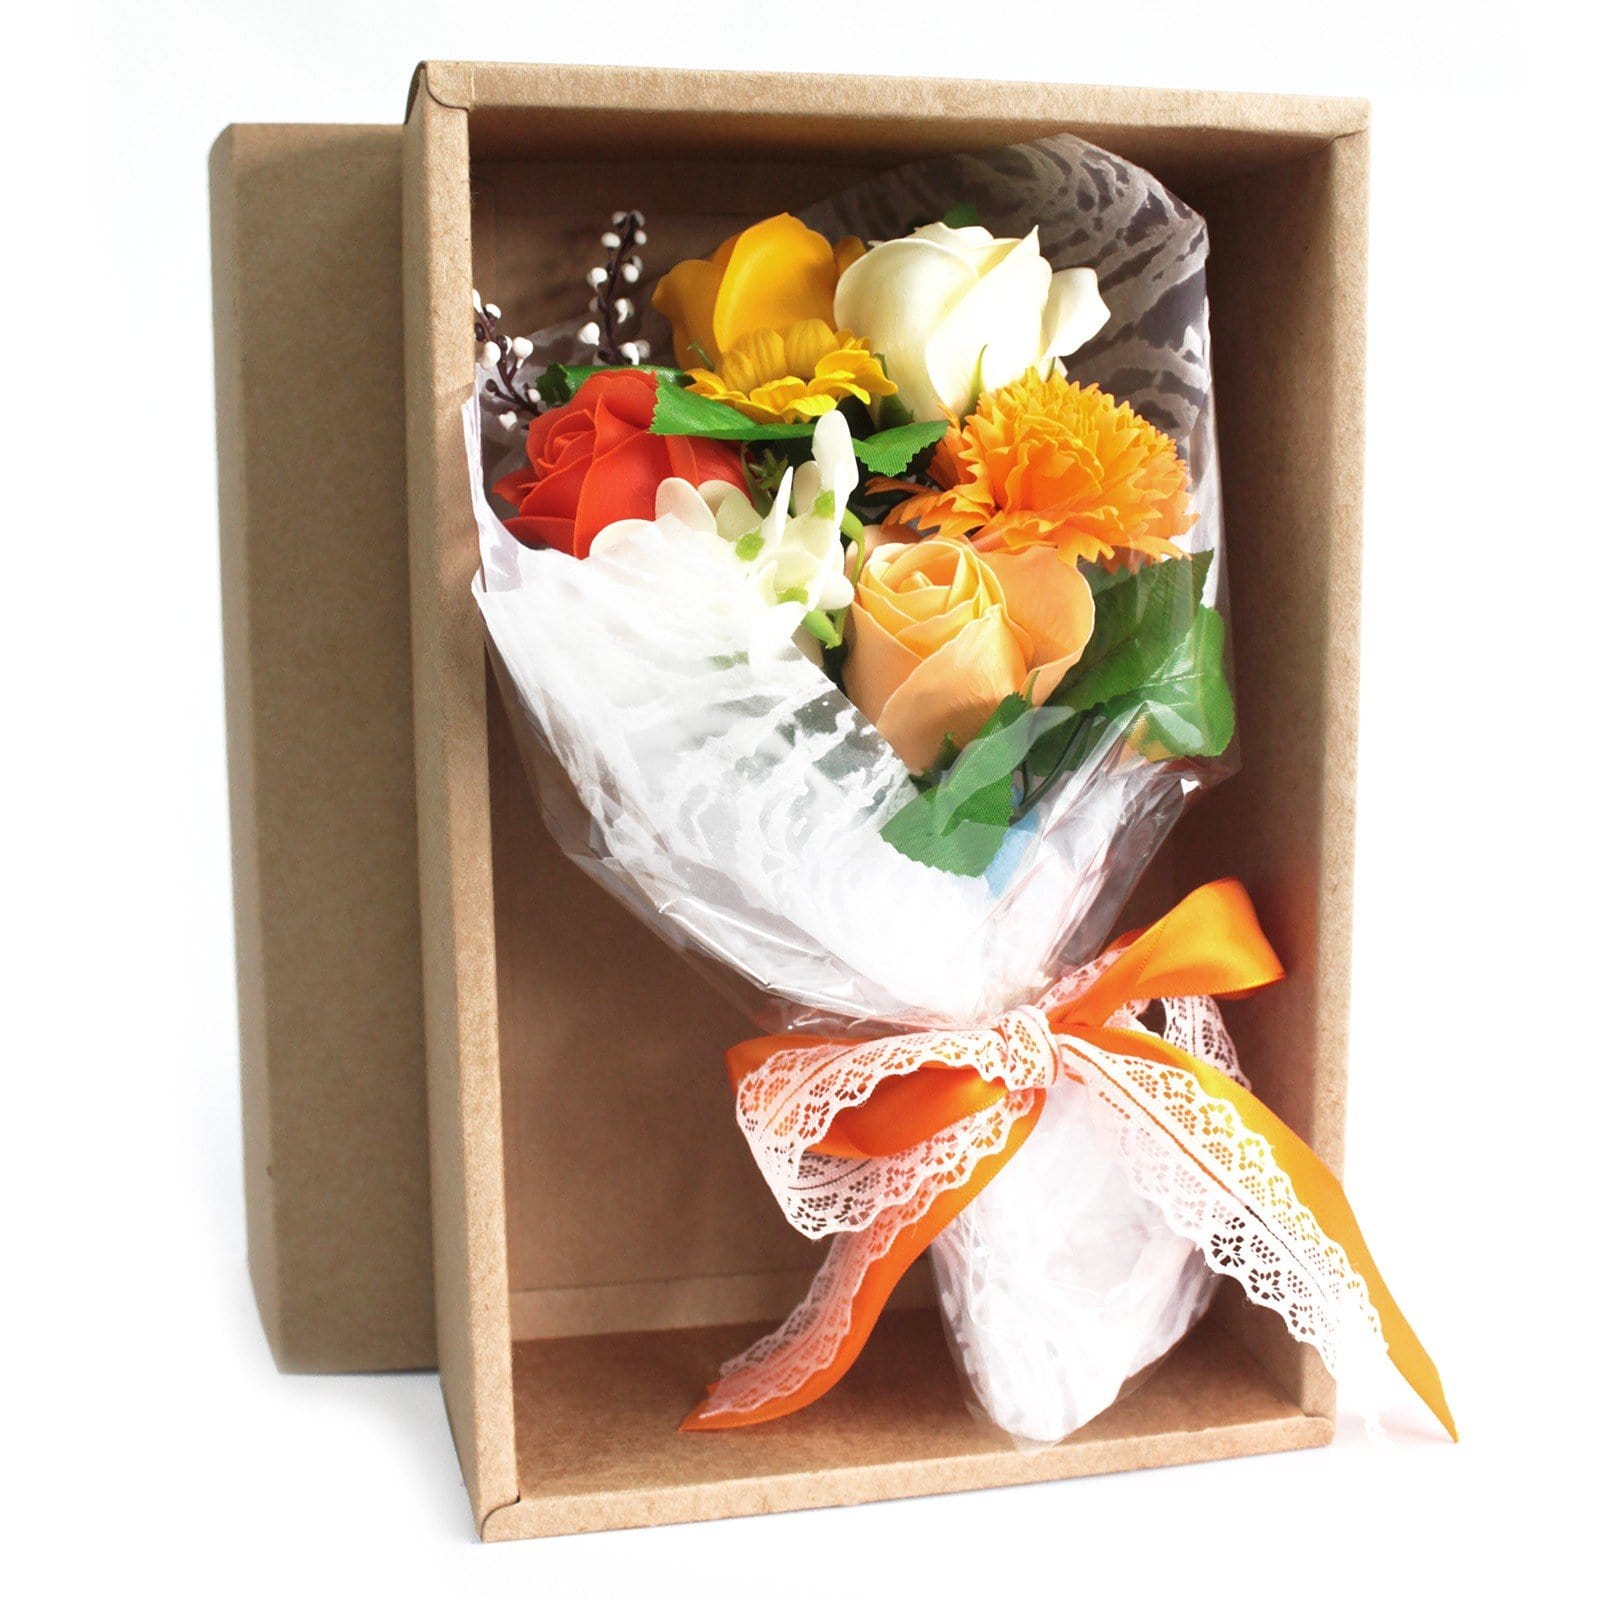 Boxed Hand Soap Flower Bouquets - ShopGreenToday